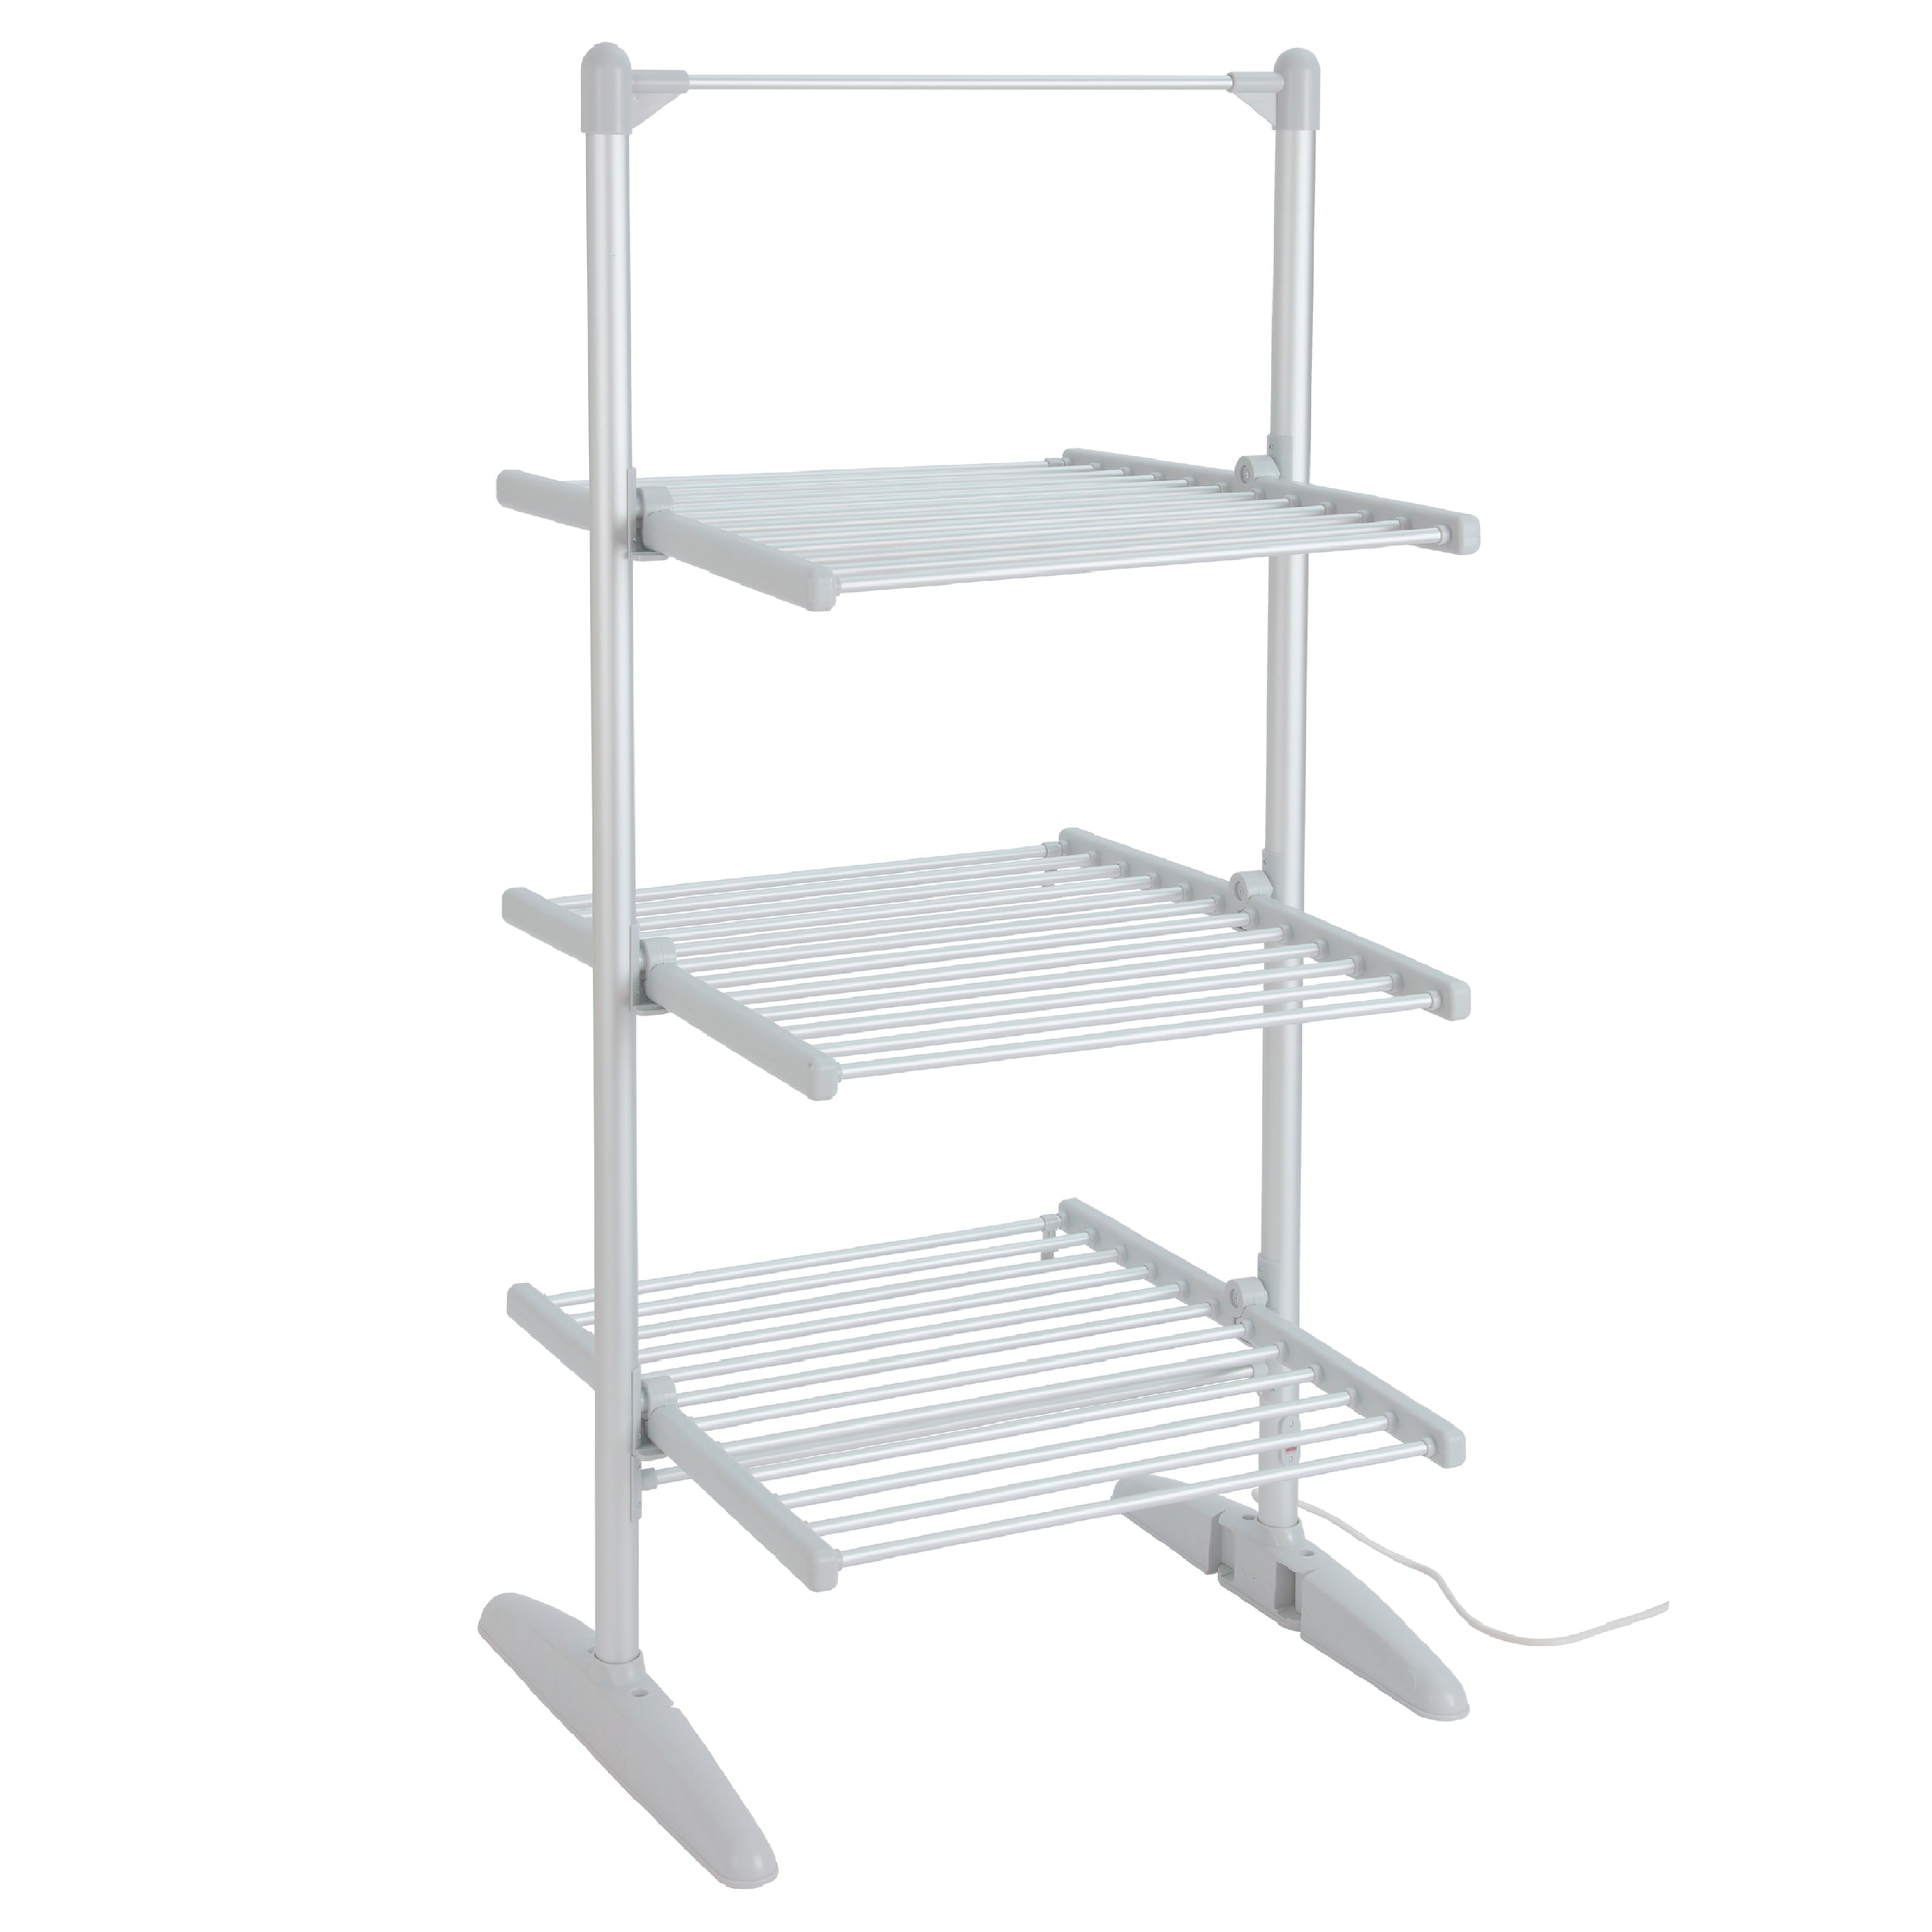 AMOS 300 Heated Electric Clothes Airer with Cover